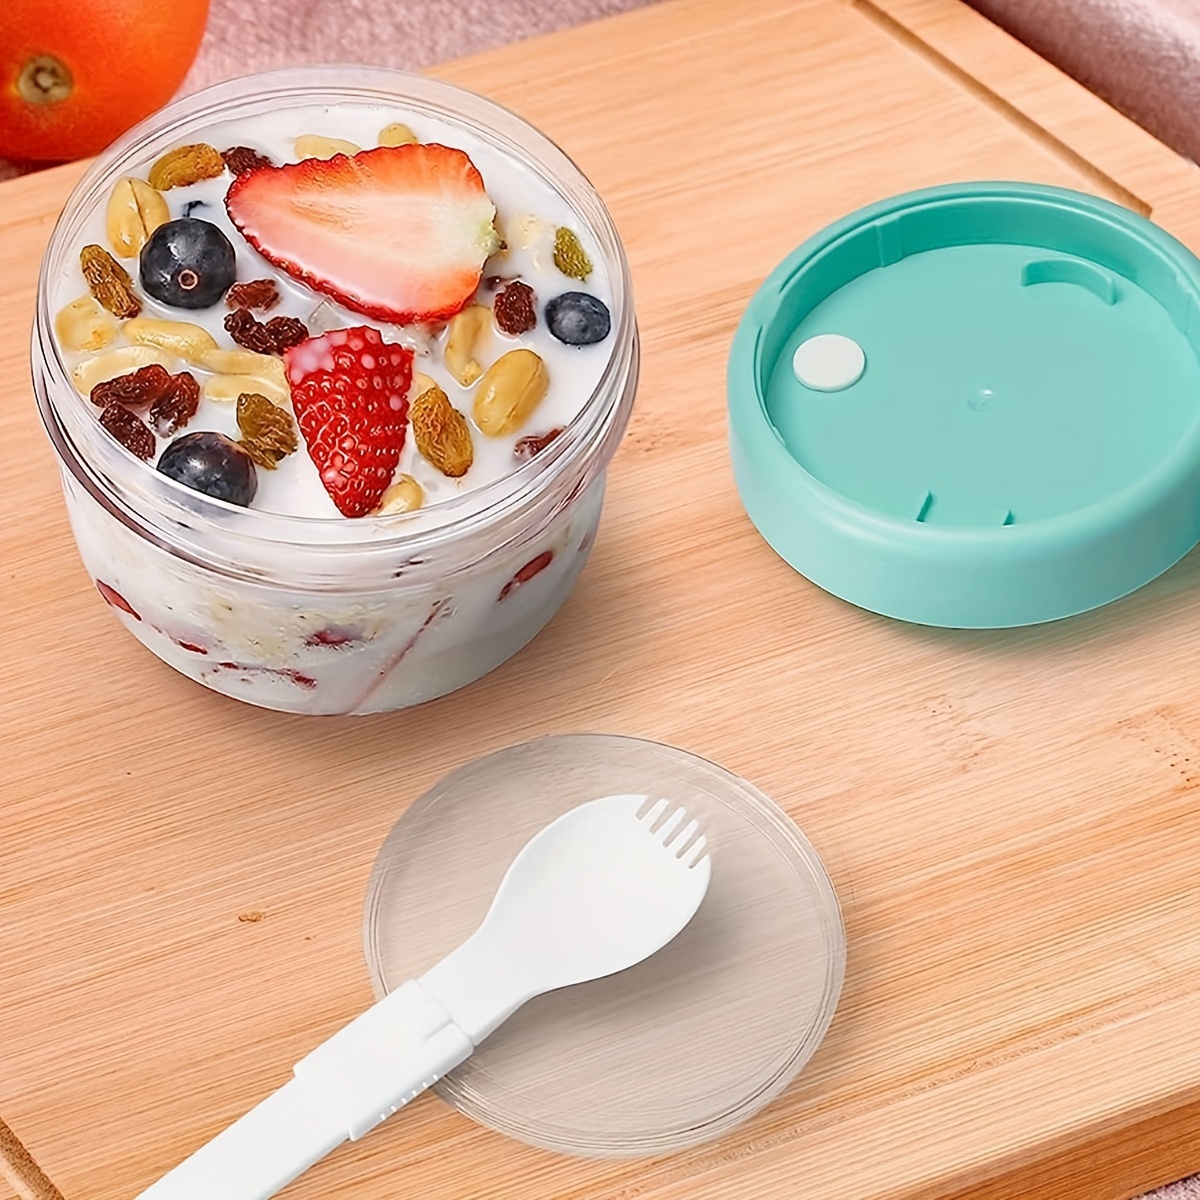 Breakfast Salad Mason Jar With Foldable Spoon And Lid, Portable Container  For Fruits, Vegetables, Yogurt, Dieting